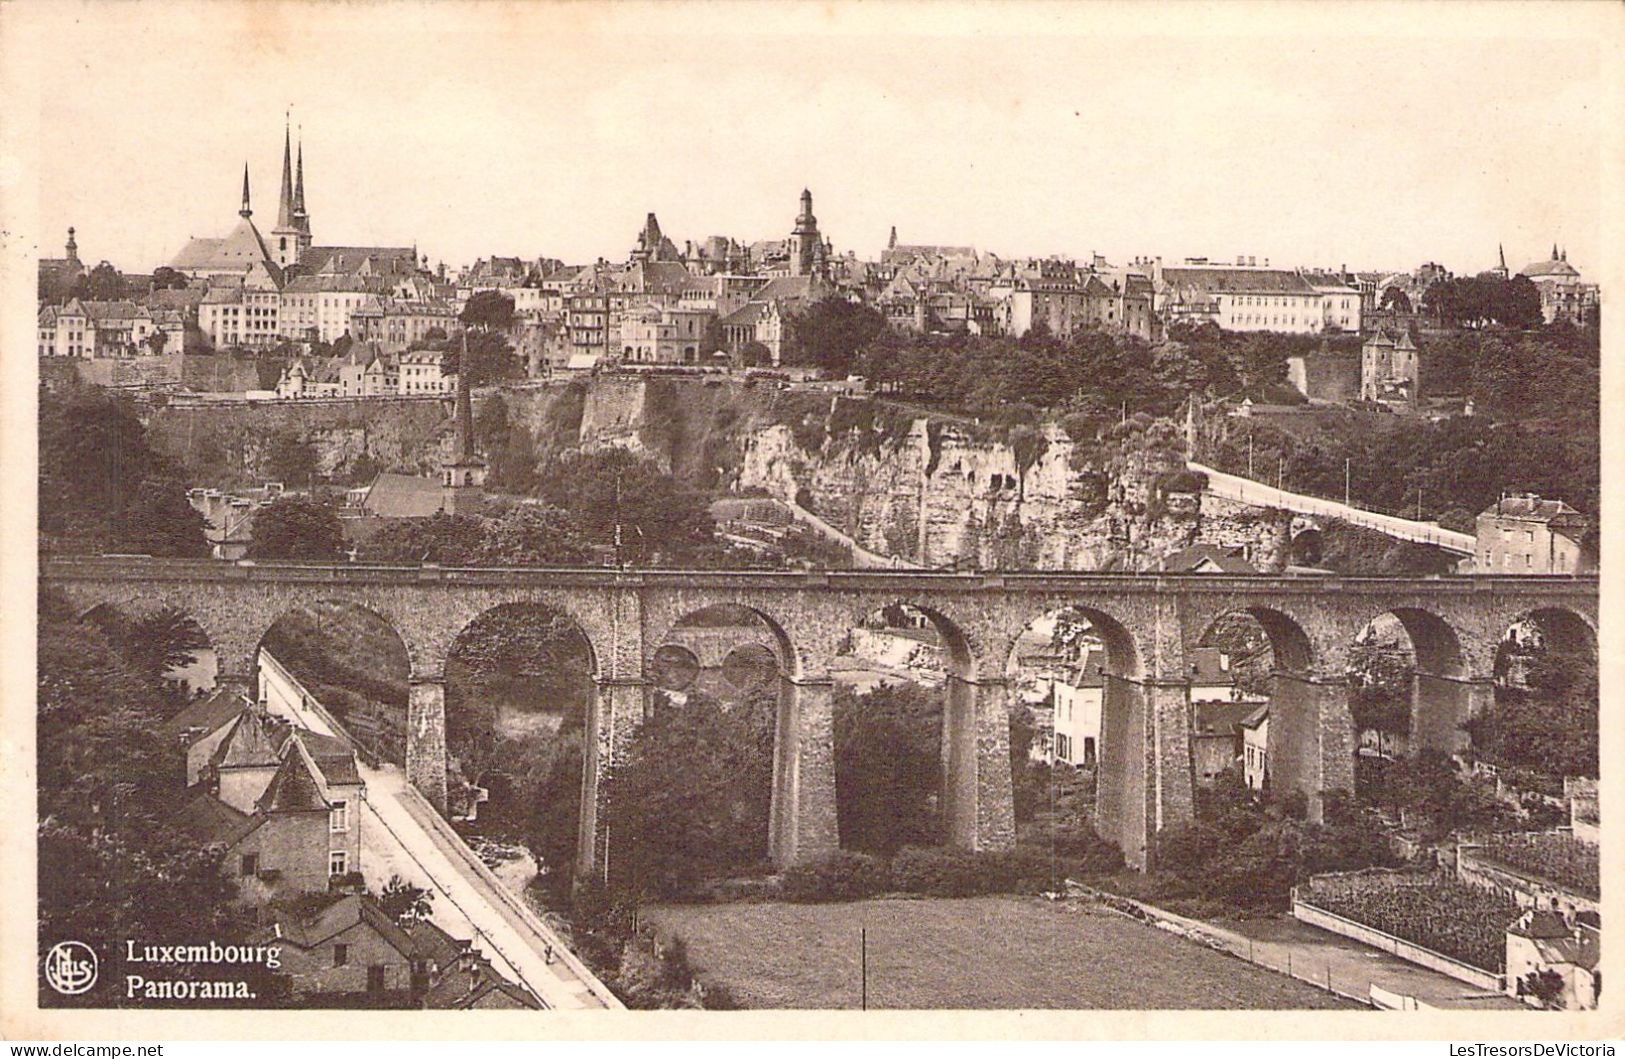 LUXEMBOURG - Panorama - Carte Postale Ancienne - Luxemburg - Stad